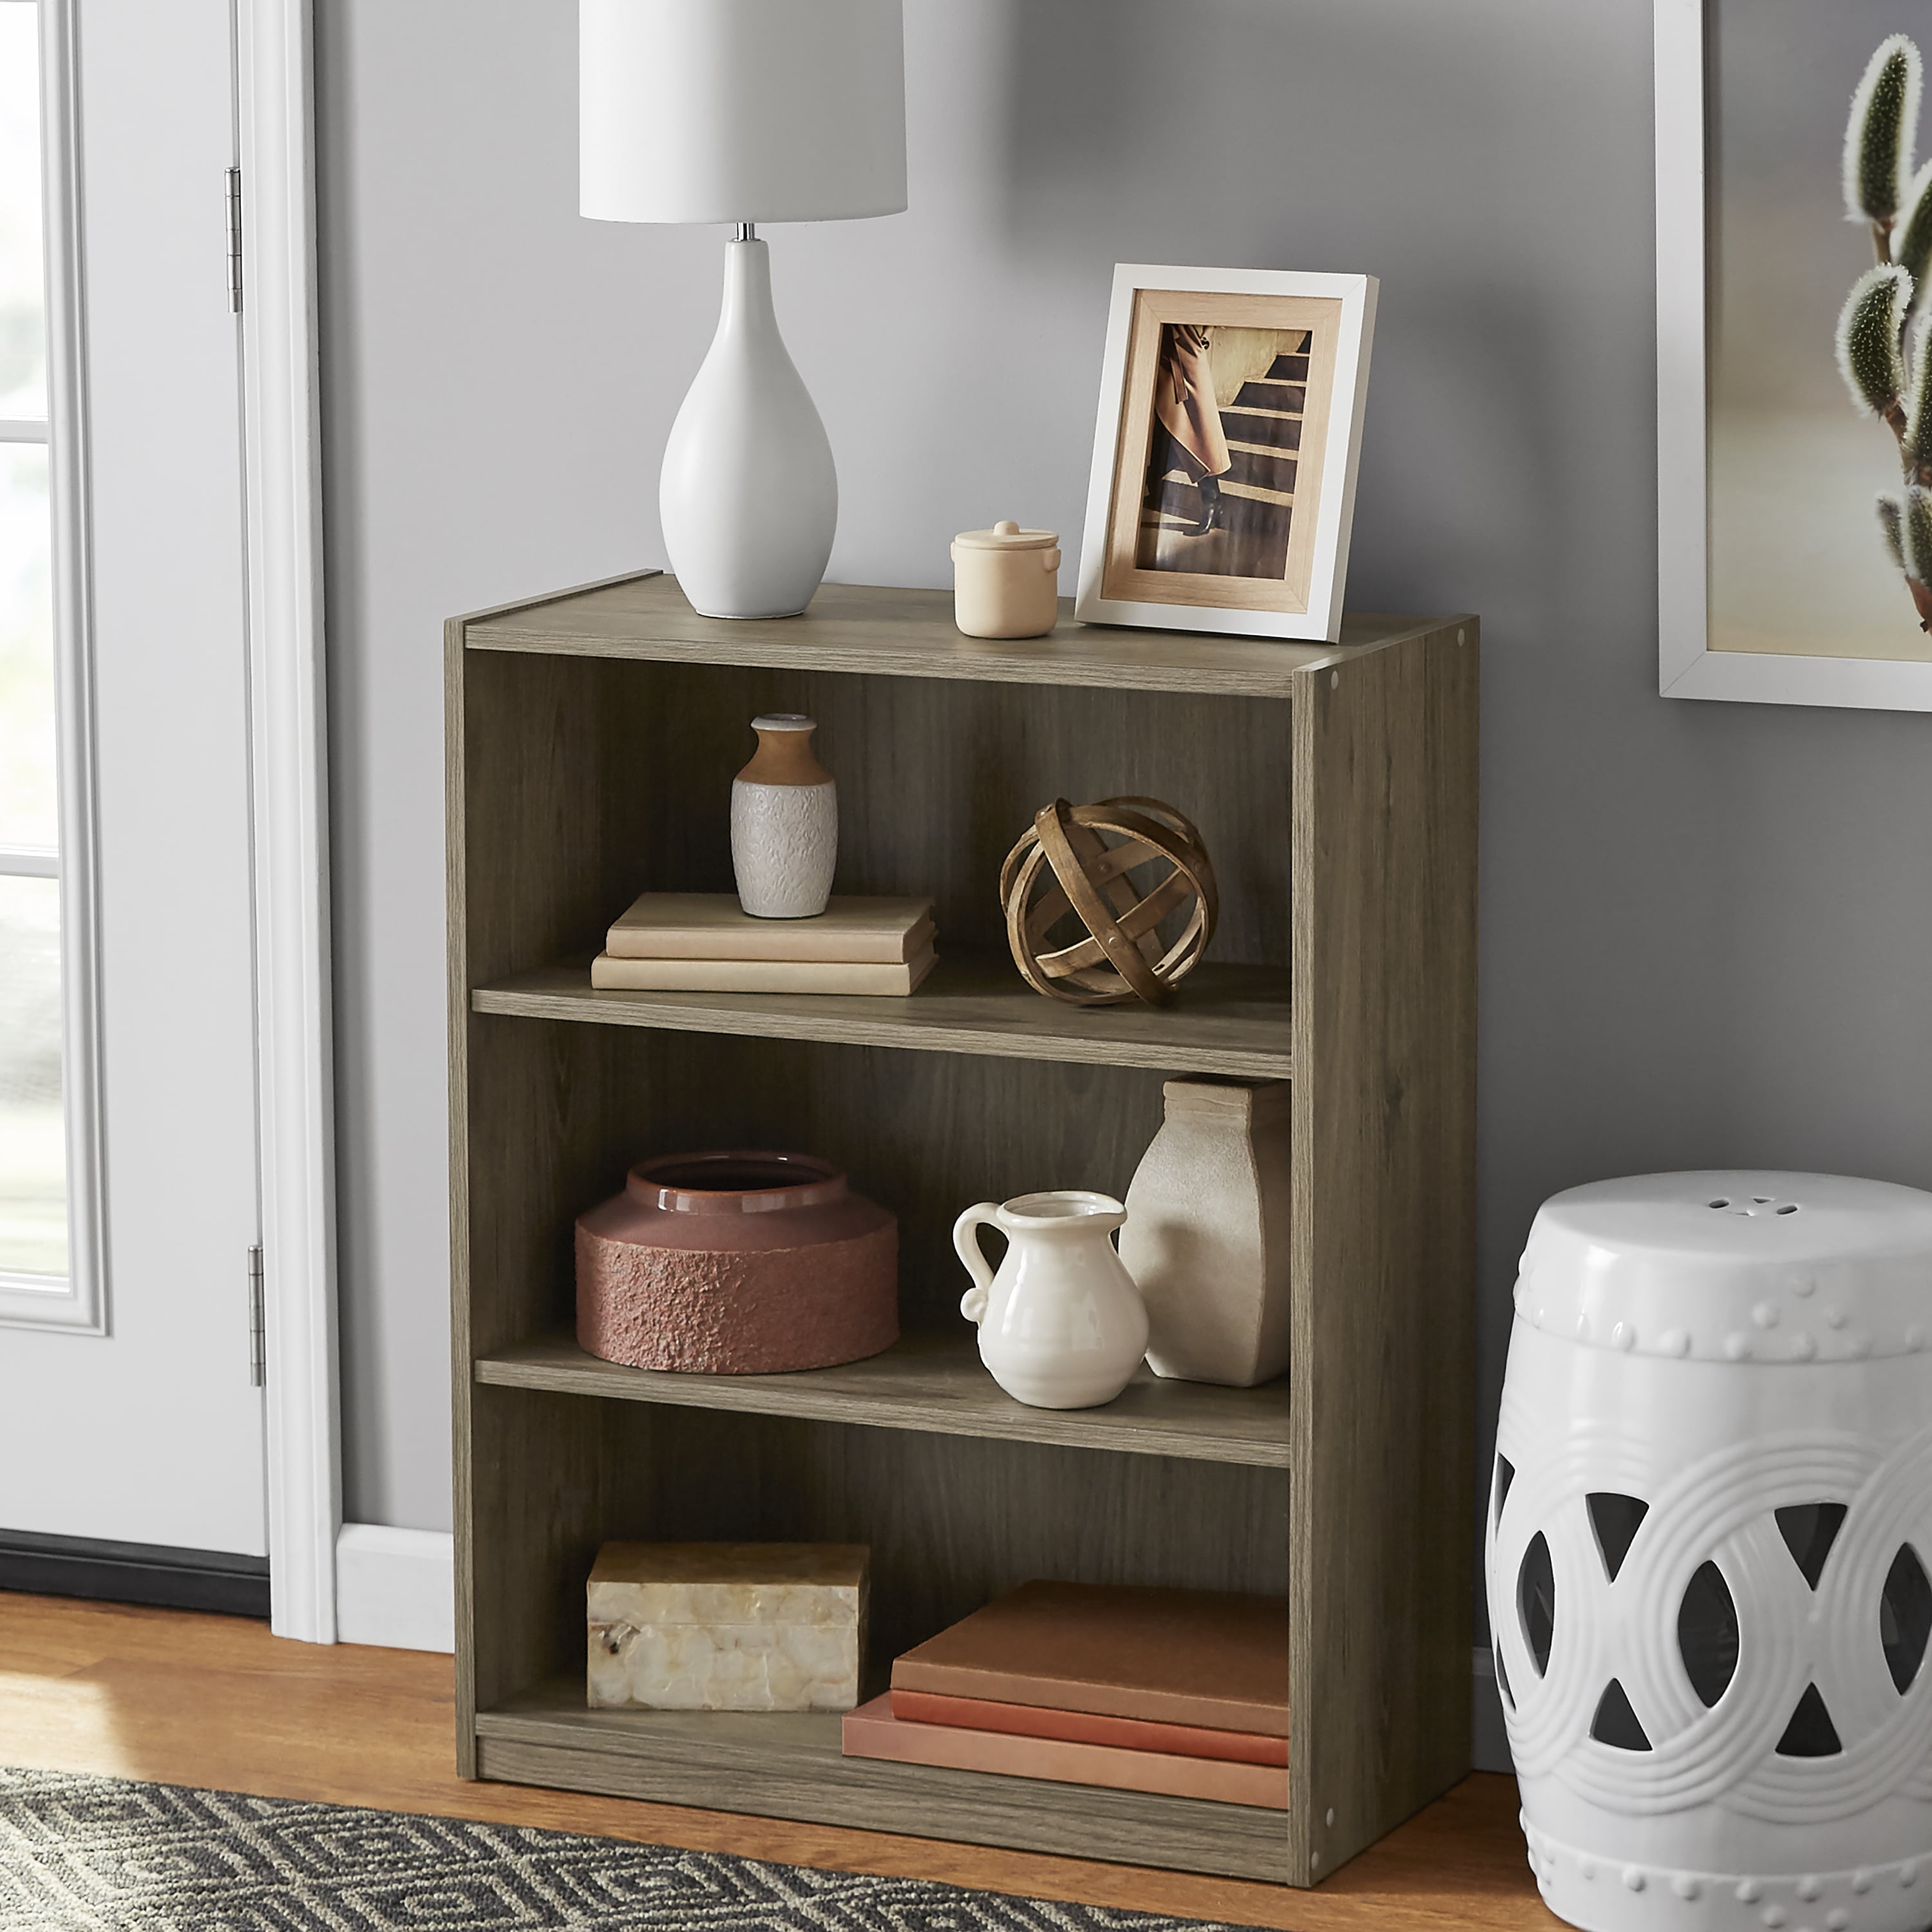 Mainstays 31 3 Shelf Bookcase With, Wood Bookcases With Adjustable Shelves